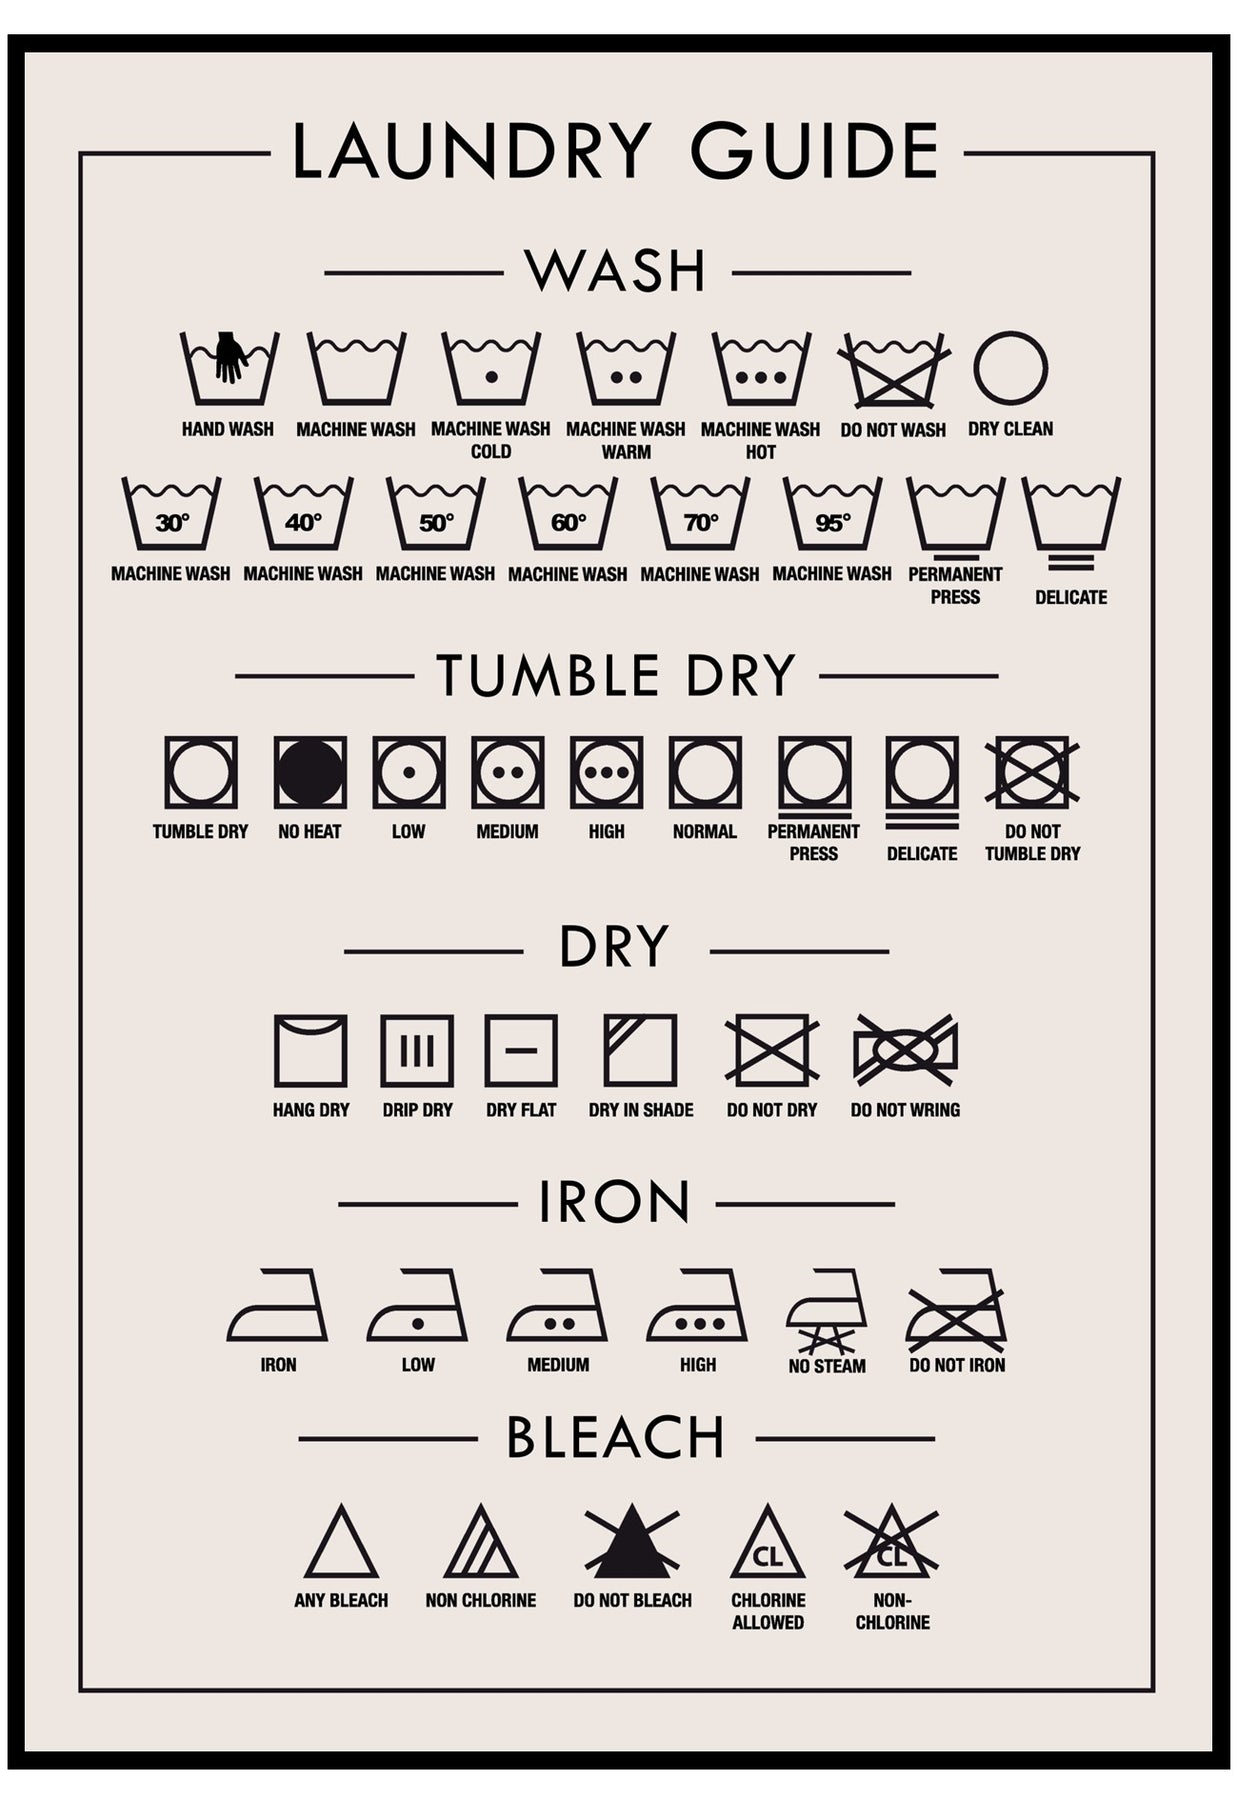 Beige Laundry Guide Poster | Washing Symbol Wall Art For Utility Room ...